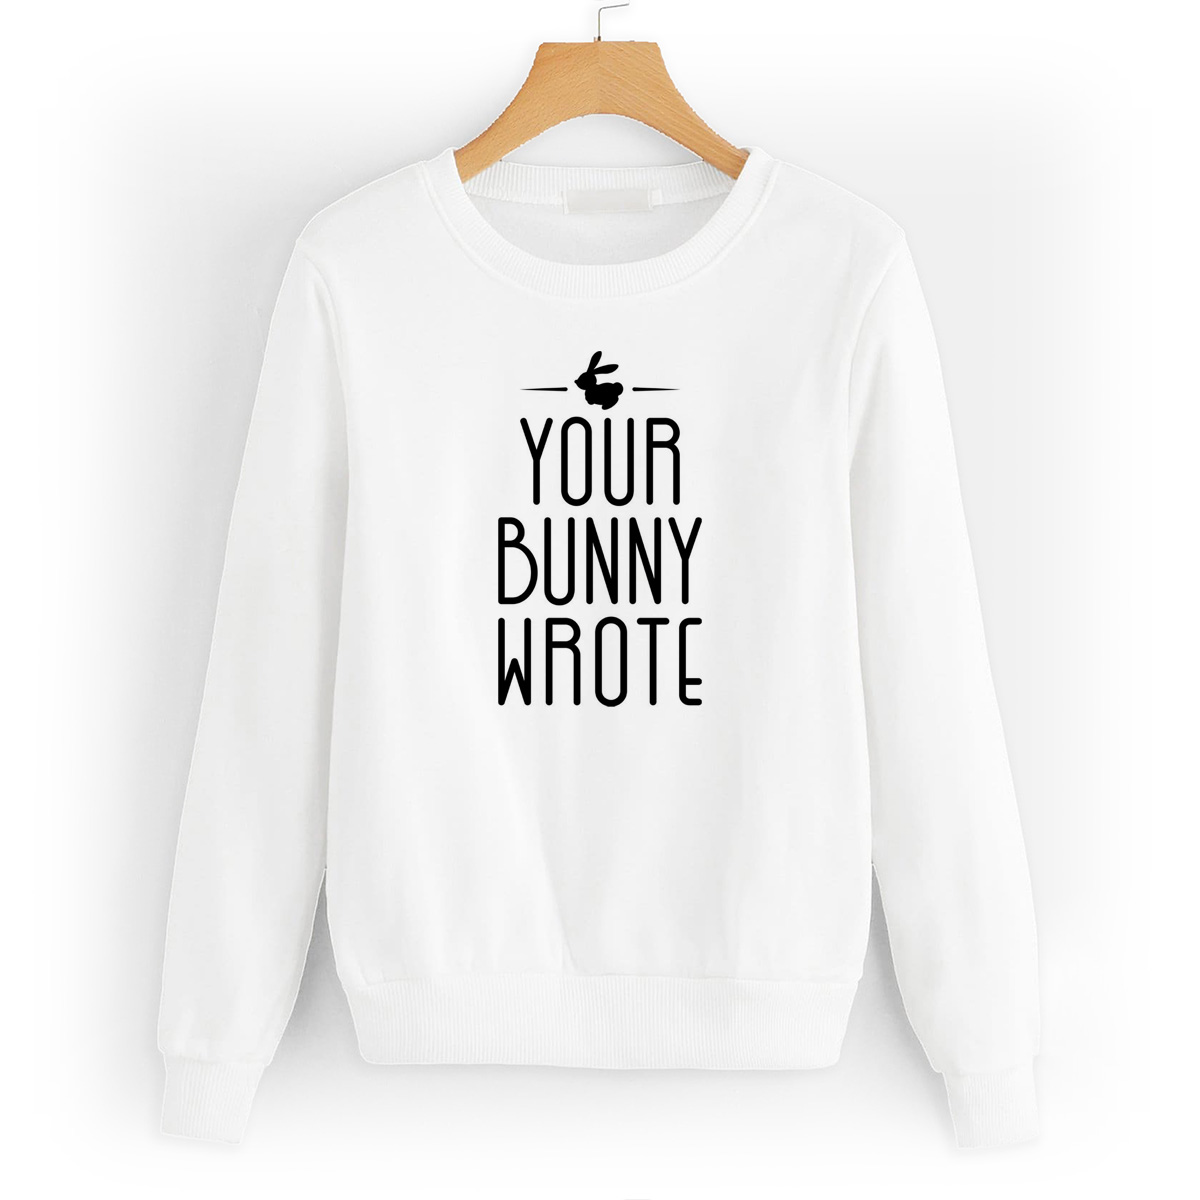 Your bunny wrote steam фото 107